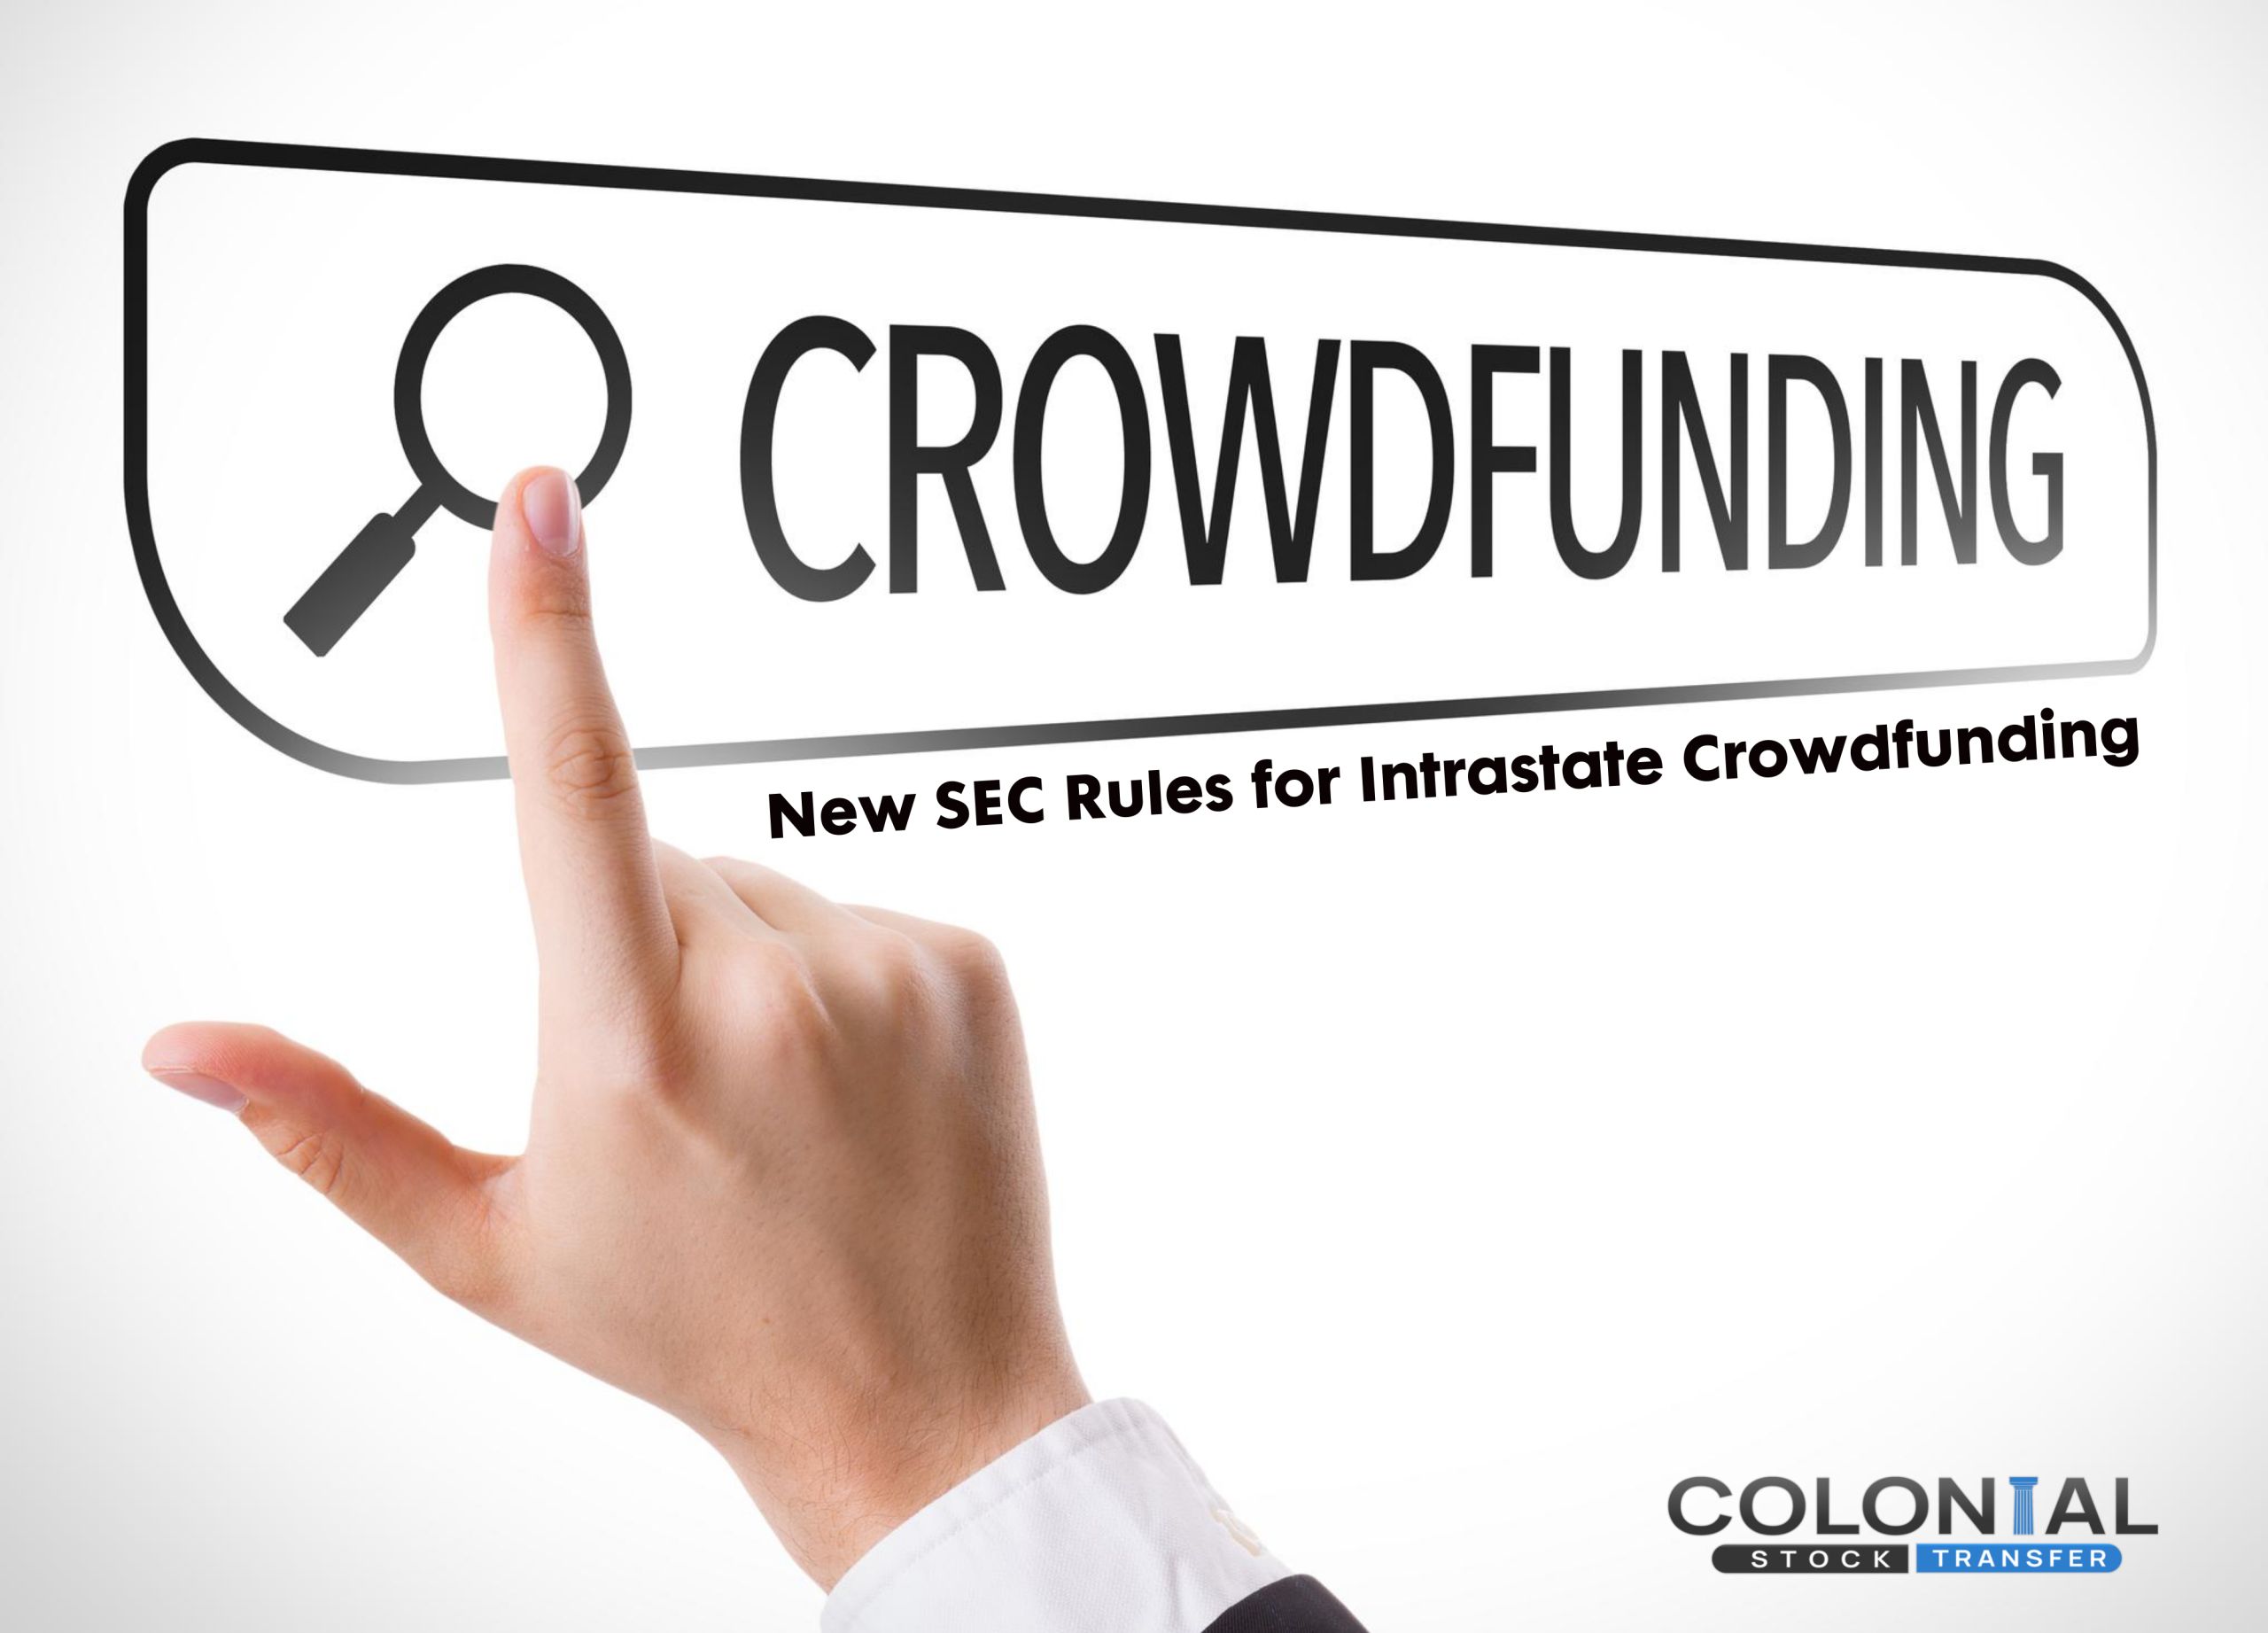 New SEC Rules for Intrastate Crowdfunding